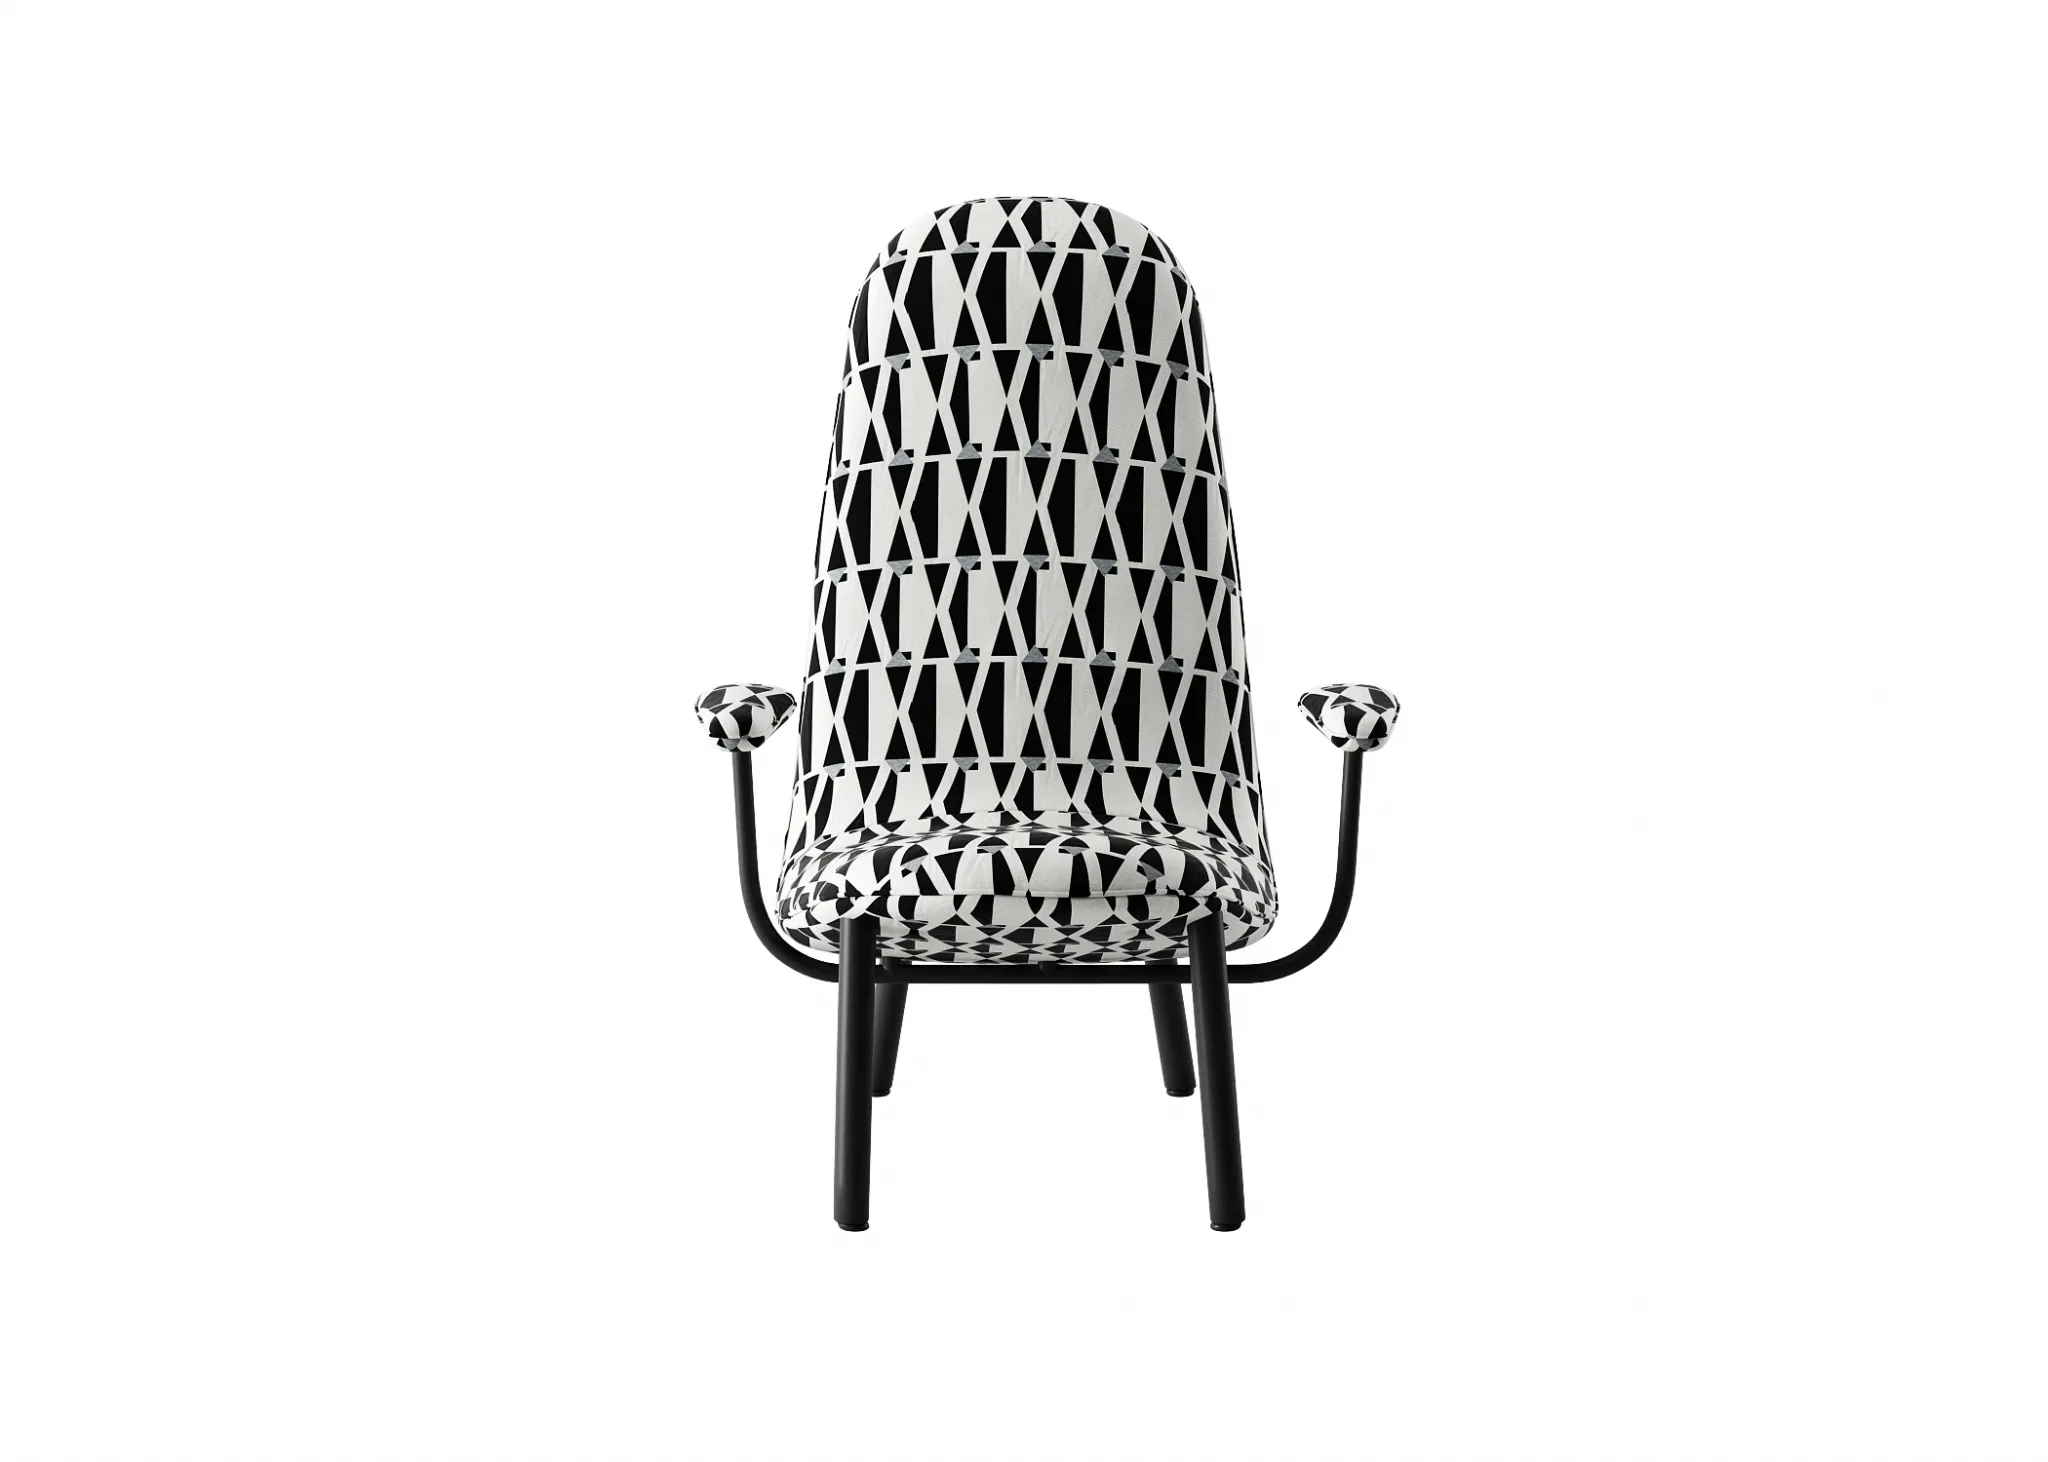 FURNITURE 3D MODELS – CHAIRS – 0009